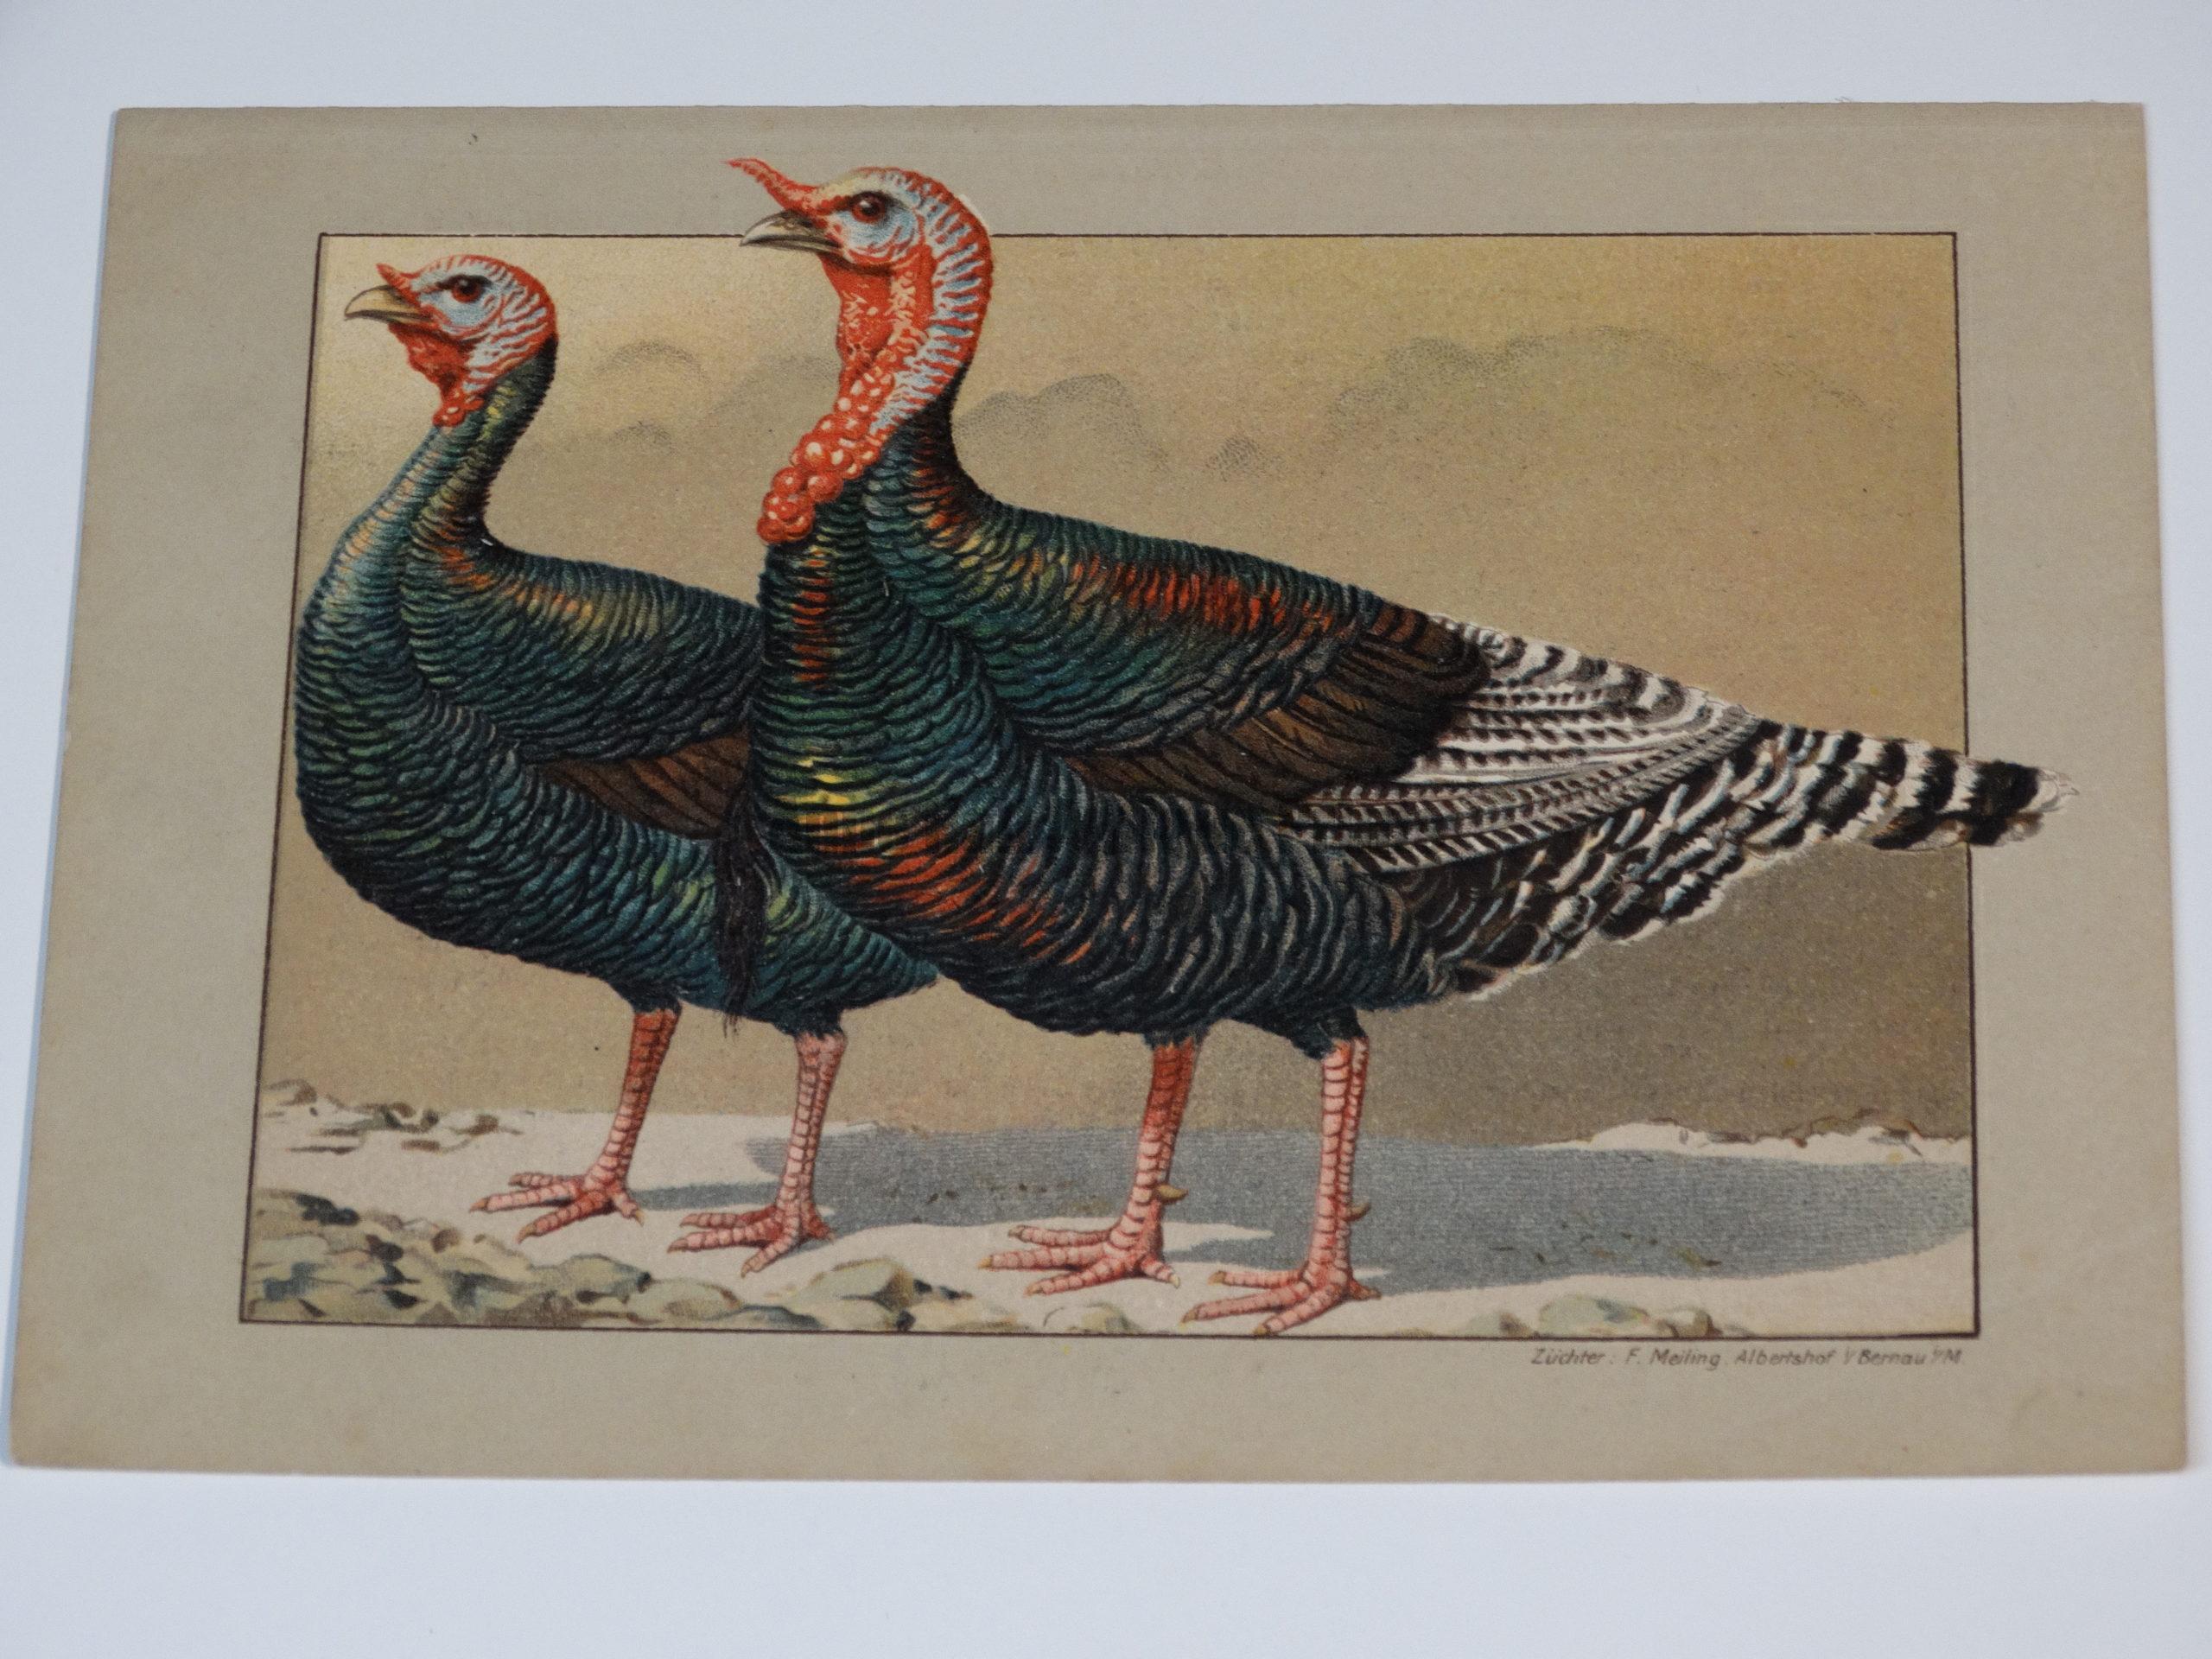 Chickens Set of Vintage Print from Lloyds Natural History water fowl etc. 1897 pheasants Game Birds